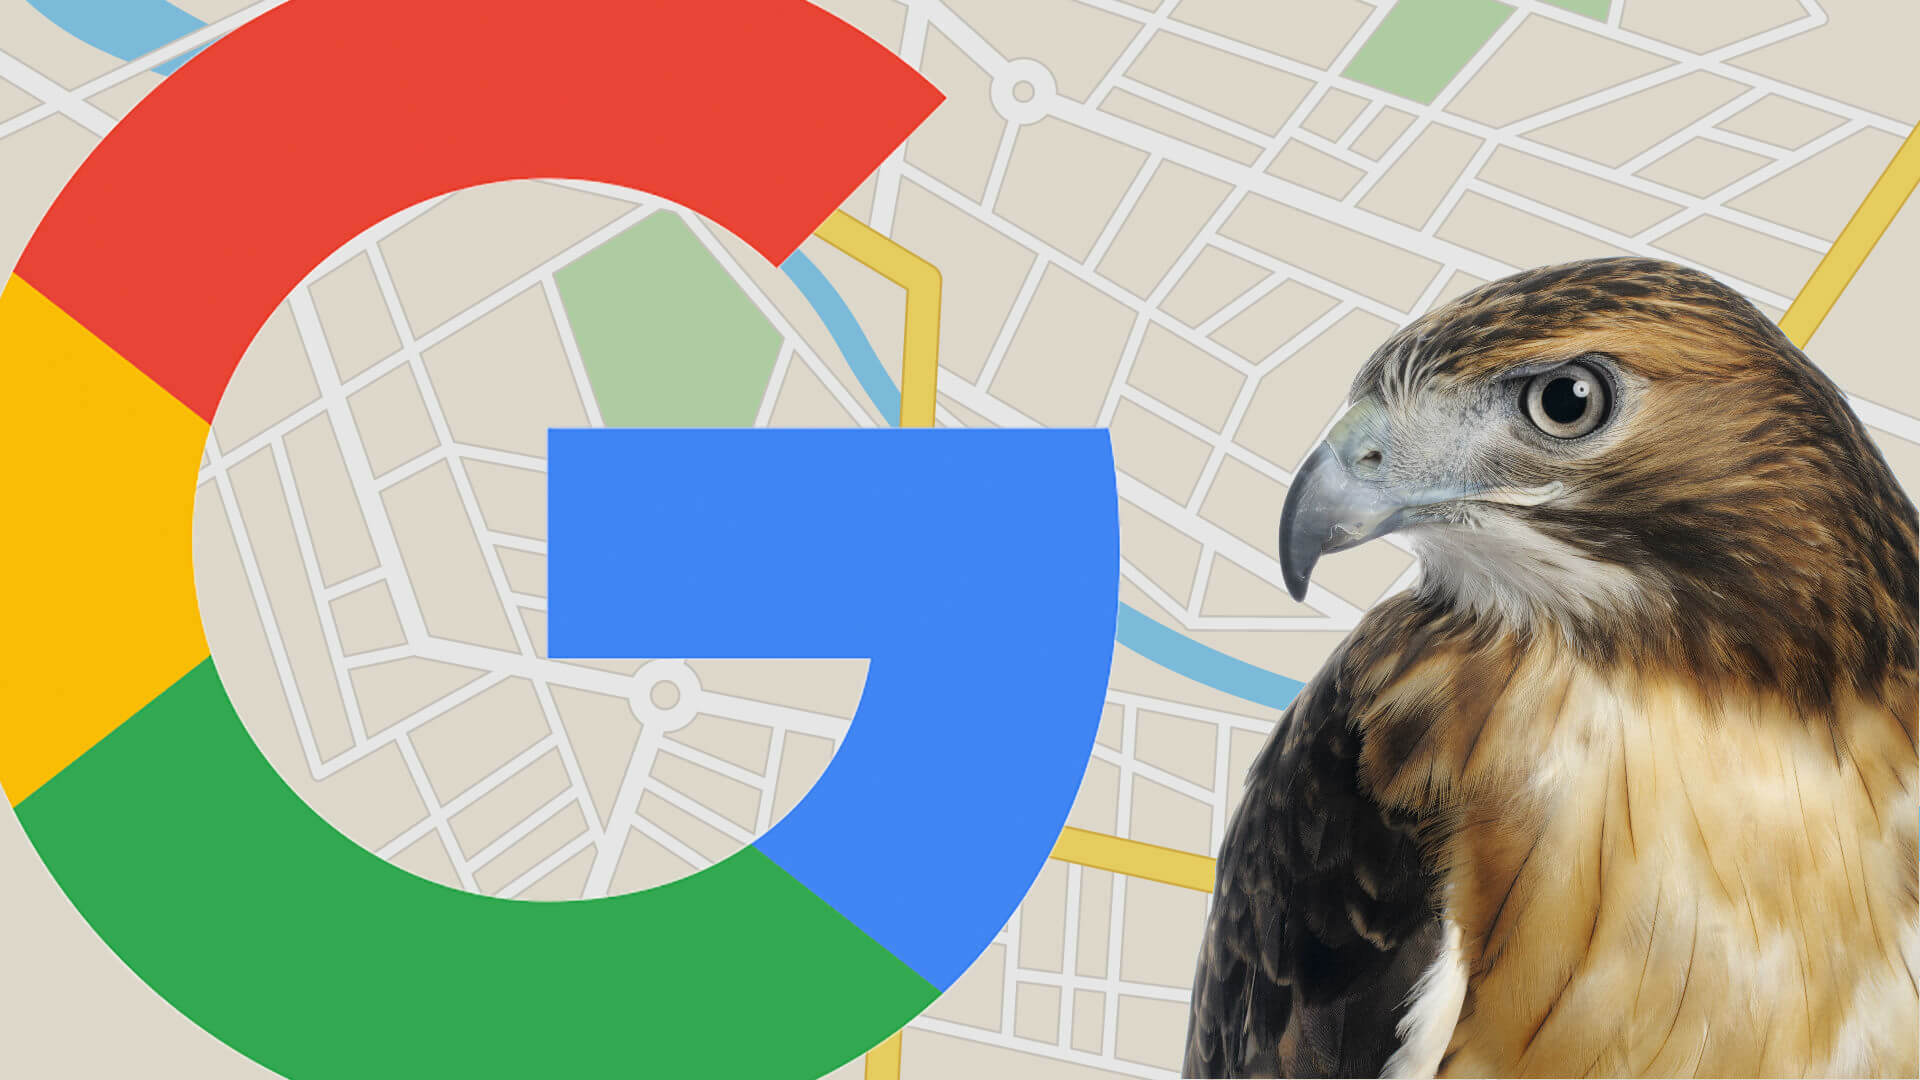 August 22, 2017: The day the 'Hawk' Google local algorithm update ...